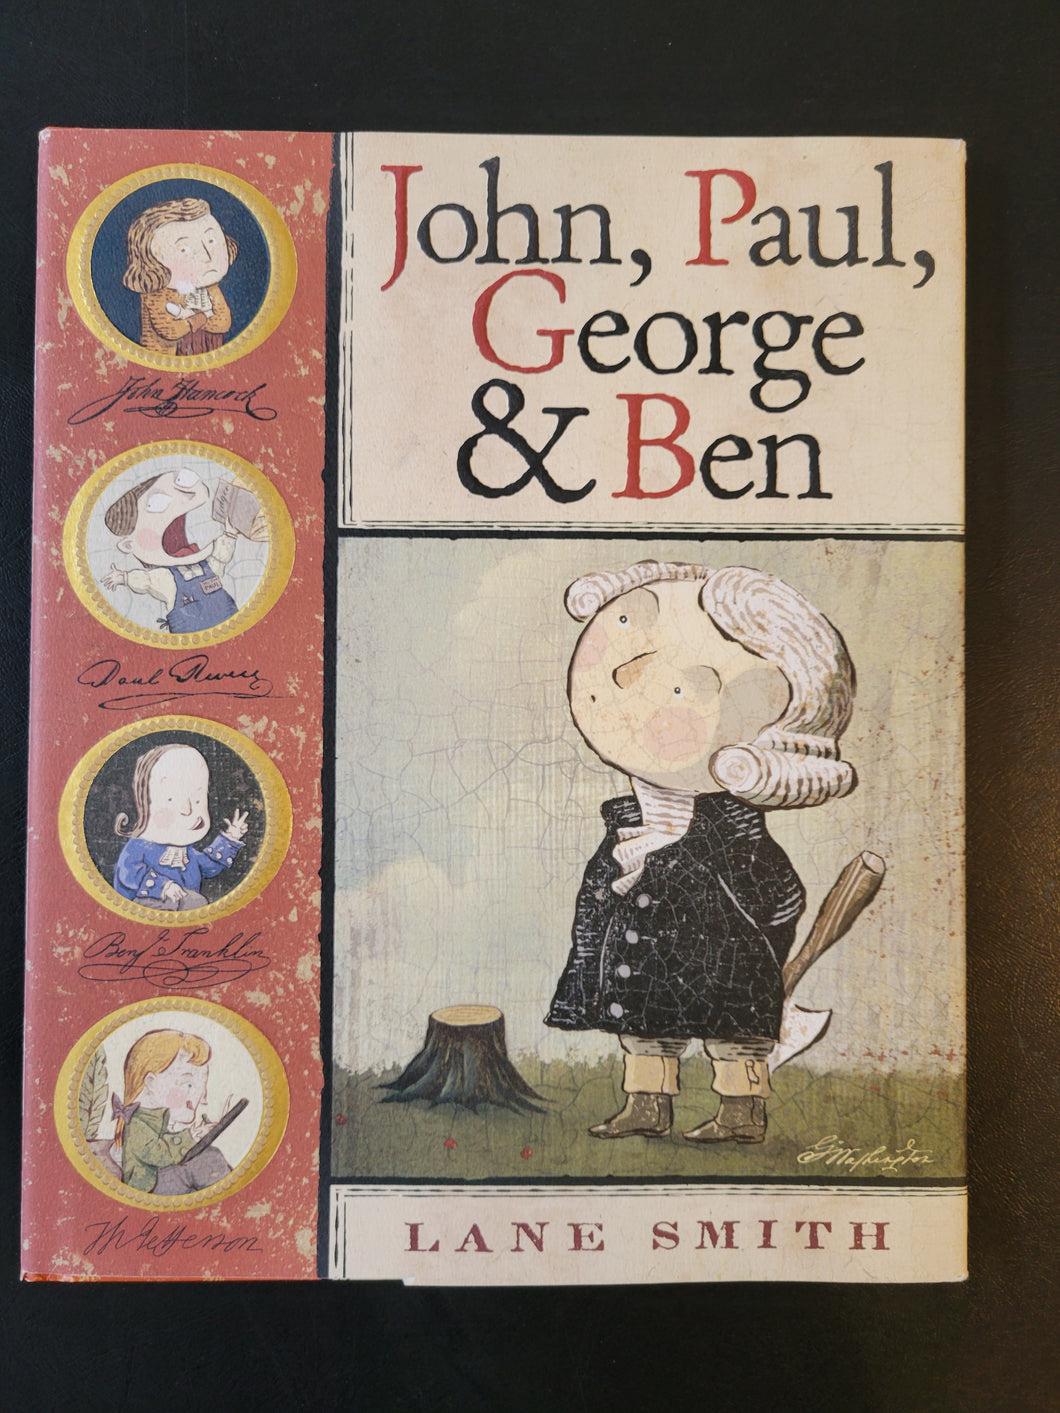 John, Paul, George and Ben by Lane Smith